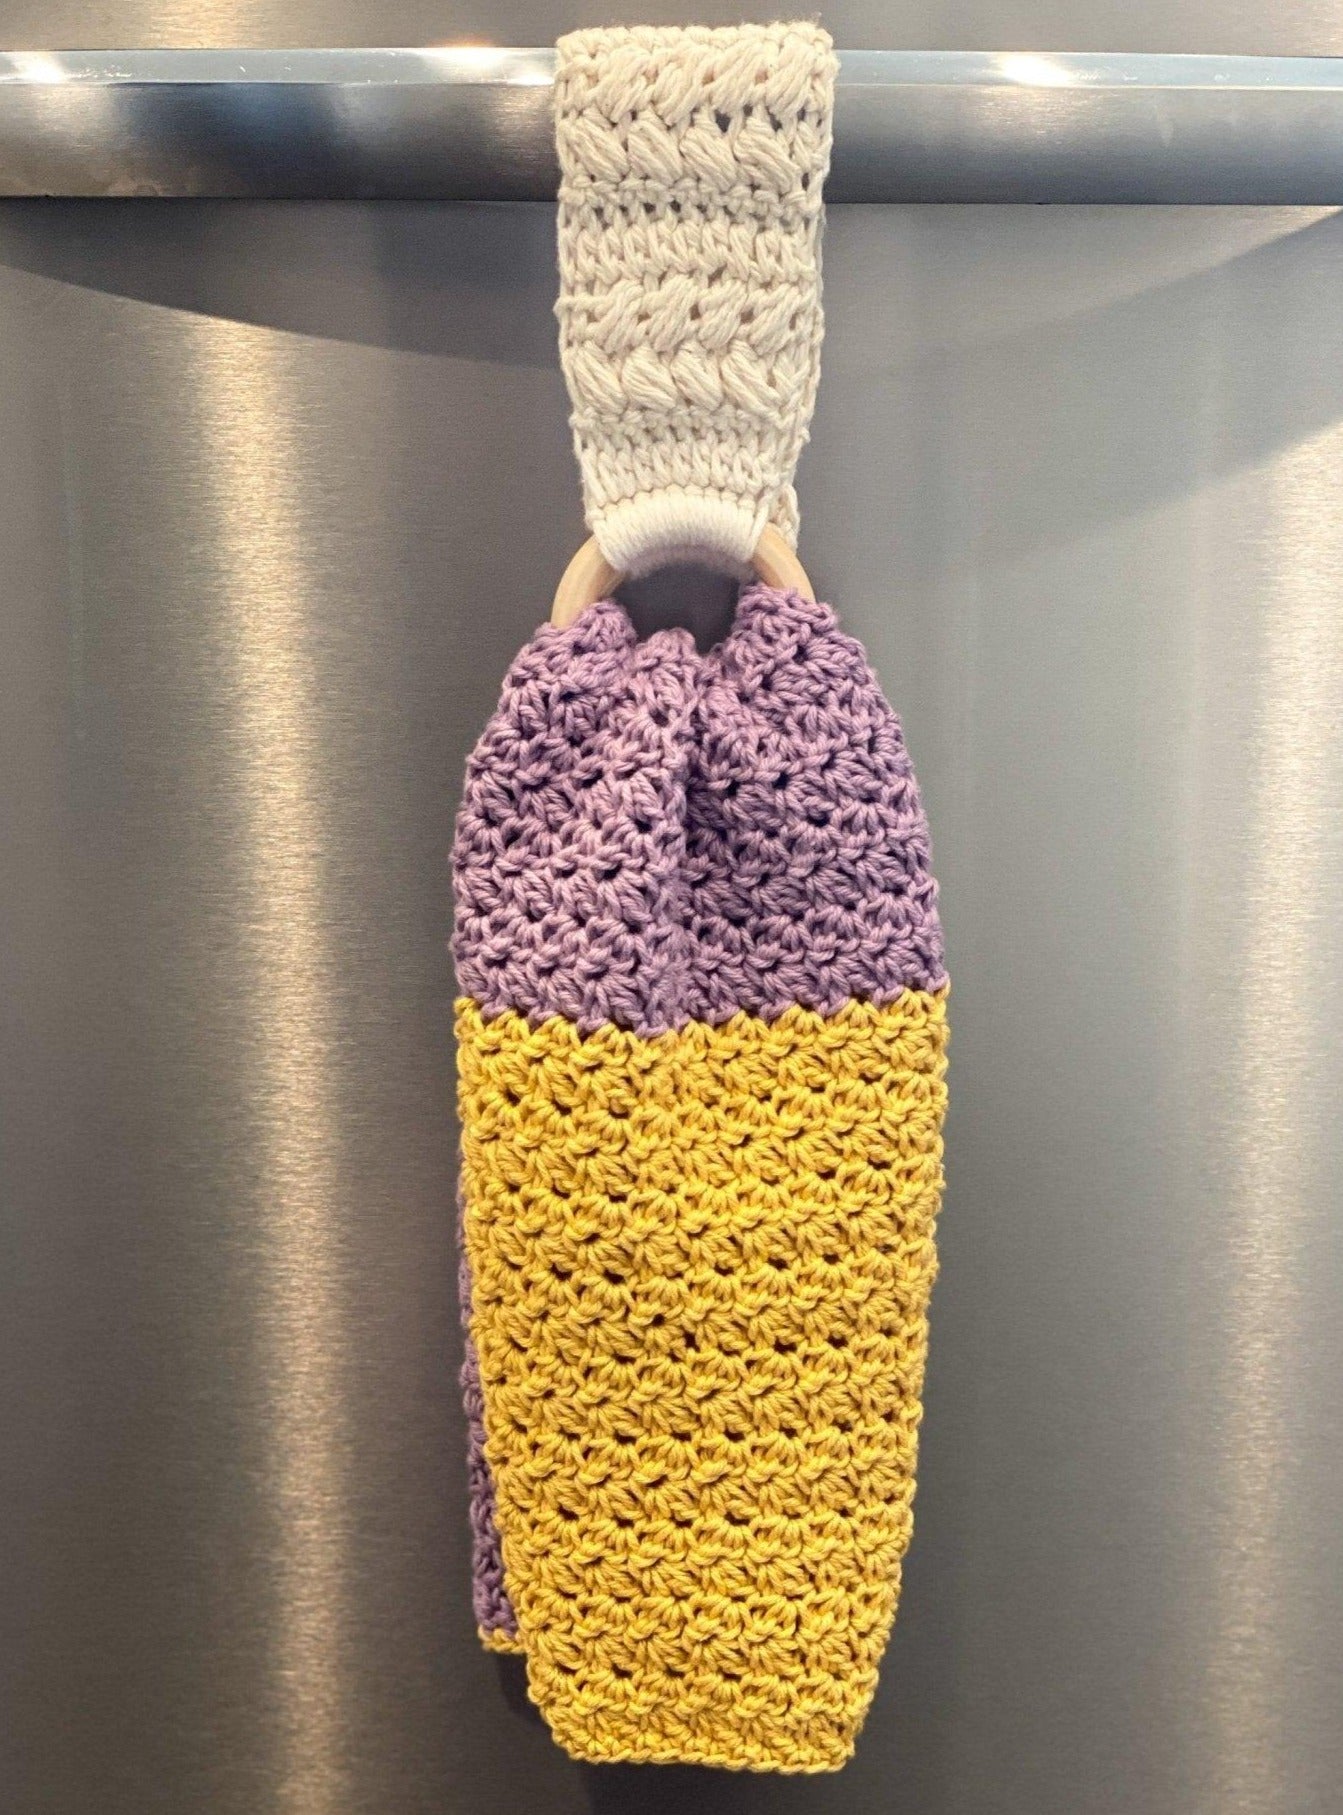 purple and gold crocheted dish towel hanging in crochet towel holder on dishwasher handle